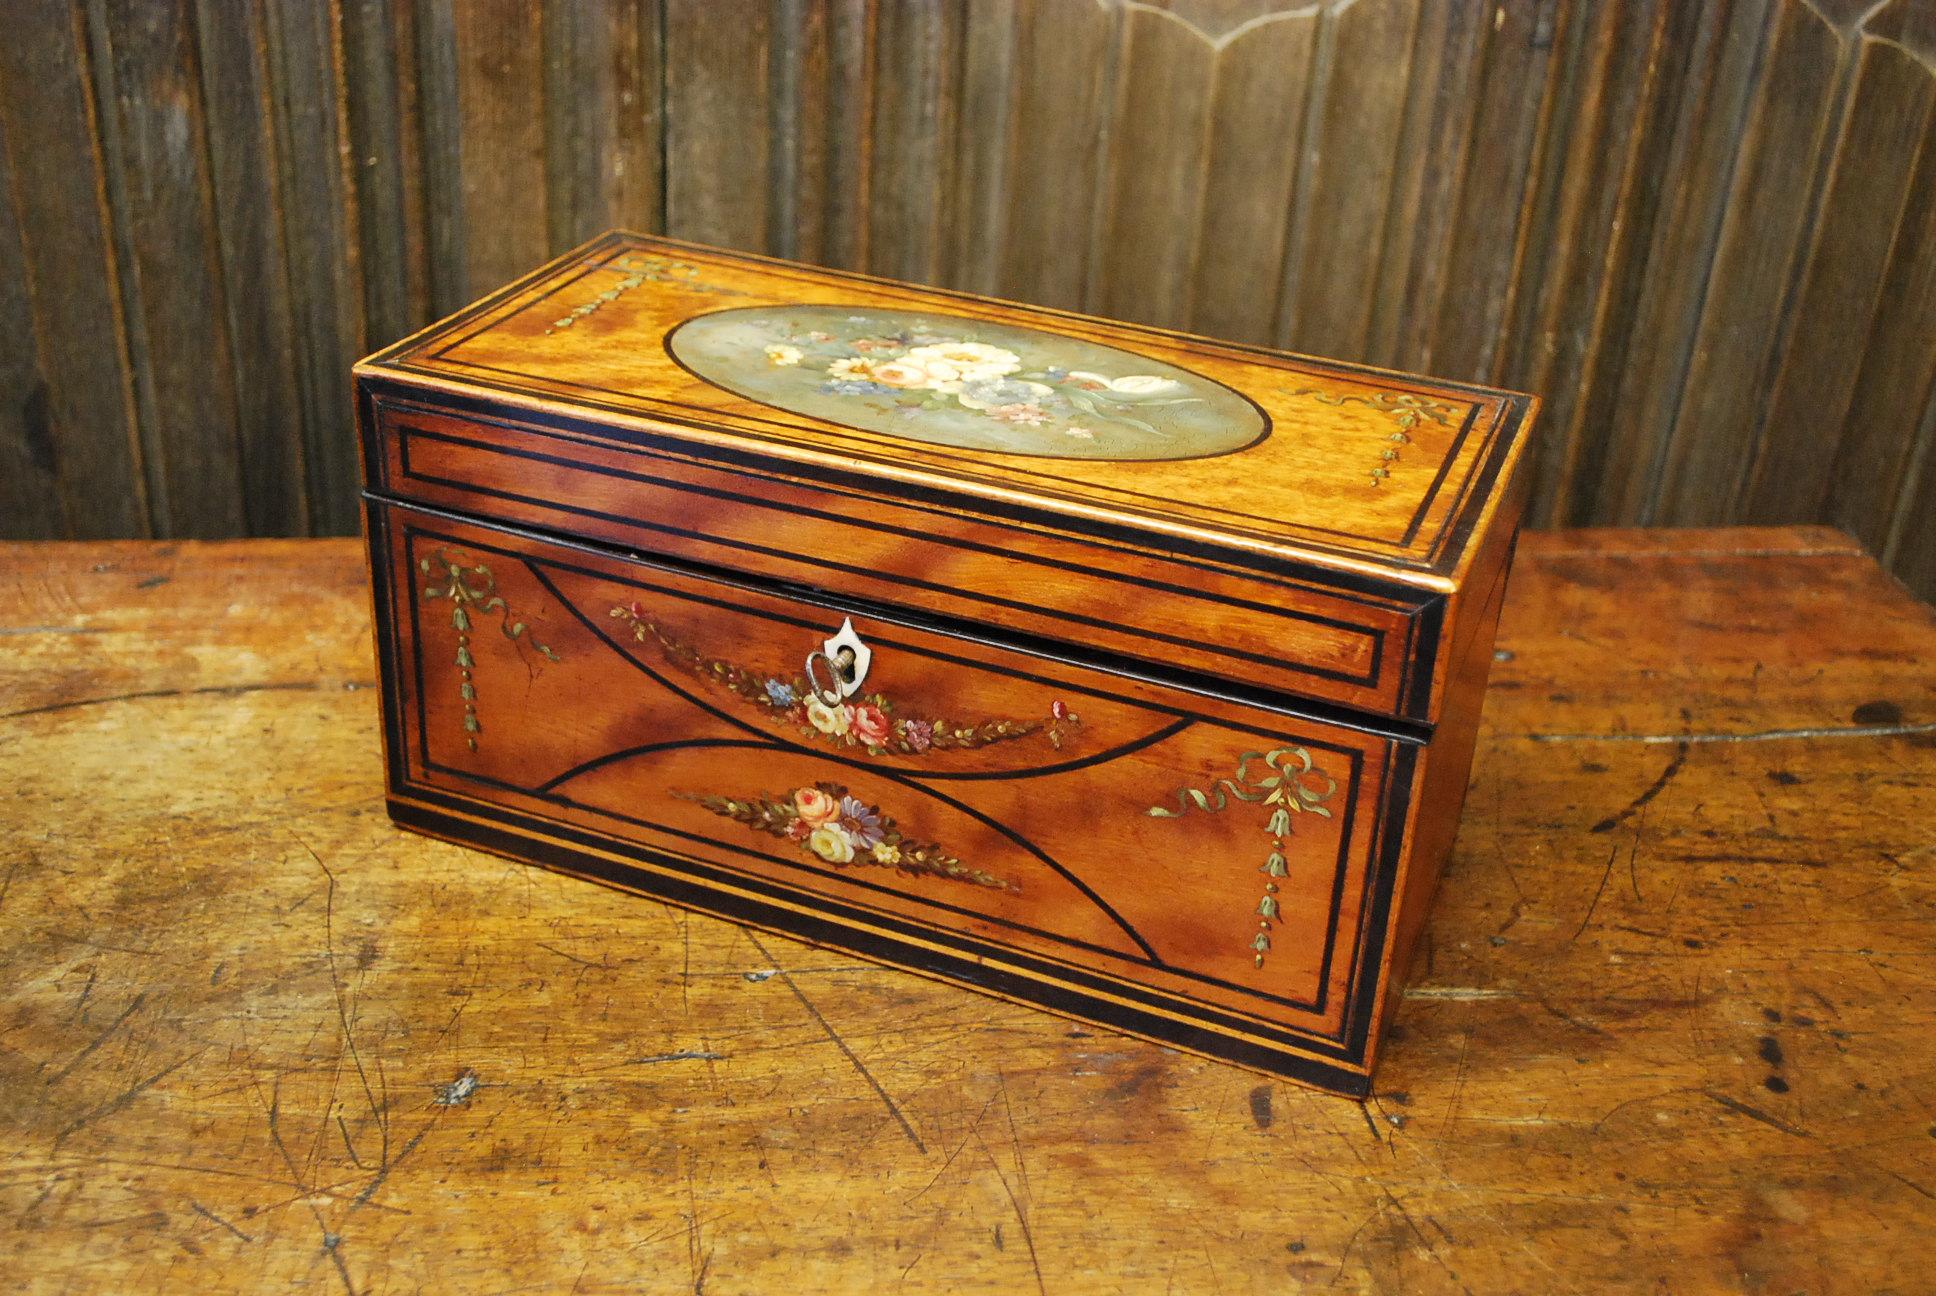 Hutton-Clarke Antiques is delighted to present an exquisite Georgian-painted satinwood Tea Caddy, crafted around 1790. This tea caddy is a true work of art, adorned with original floral festoons that have gracefully stood the test of time.

What